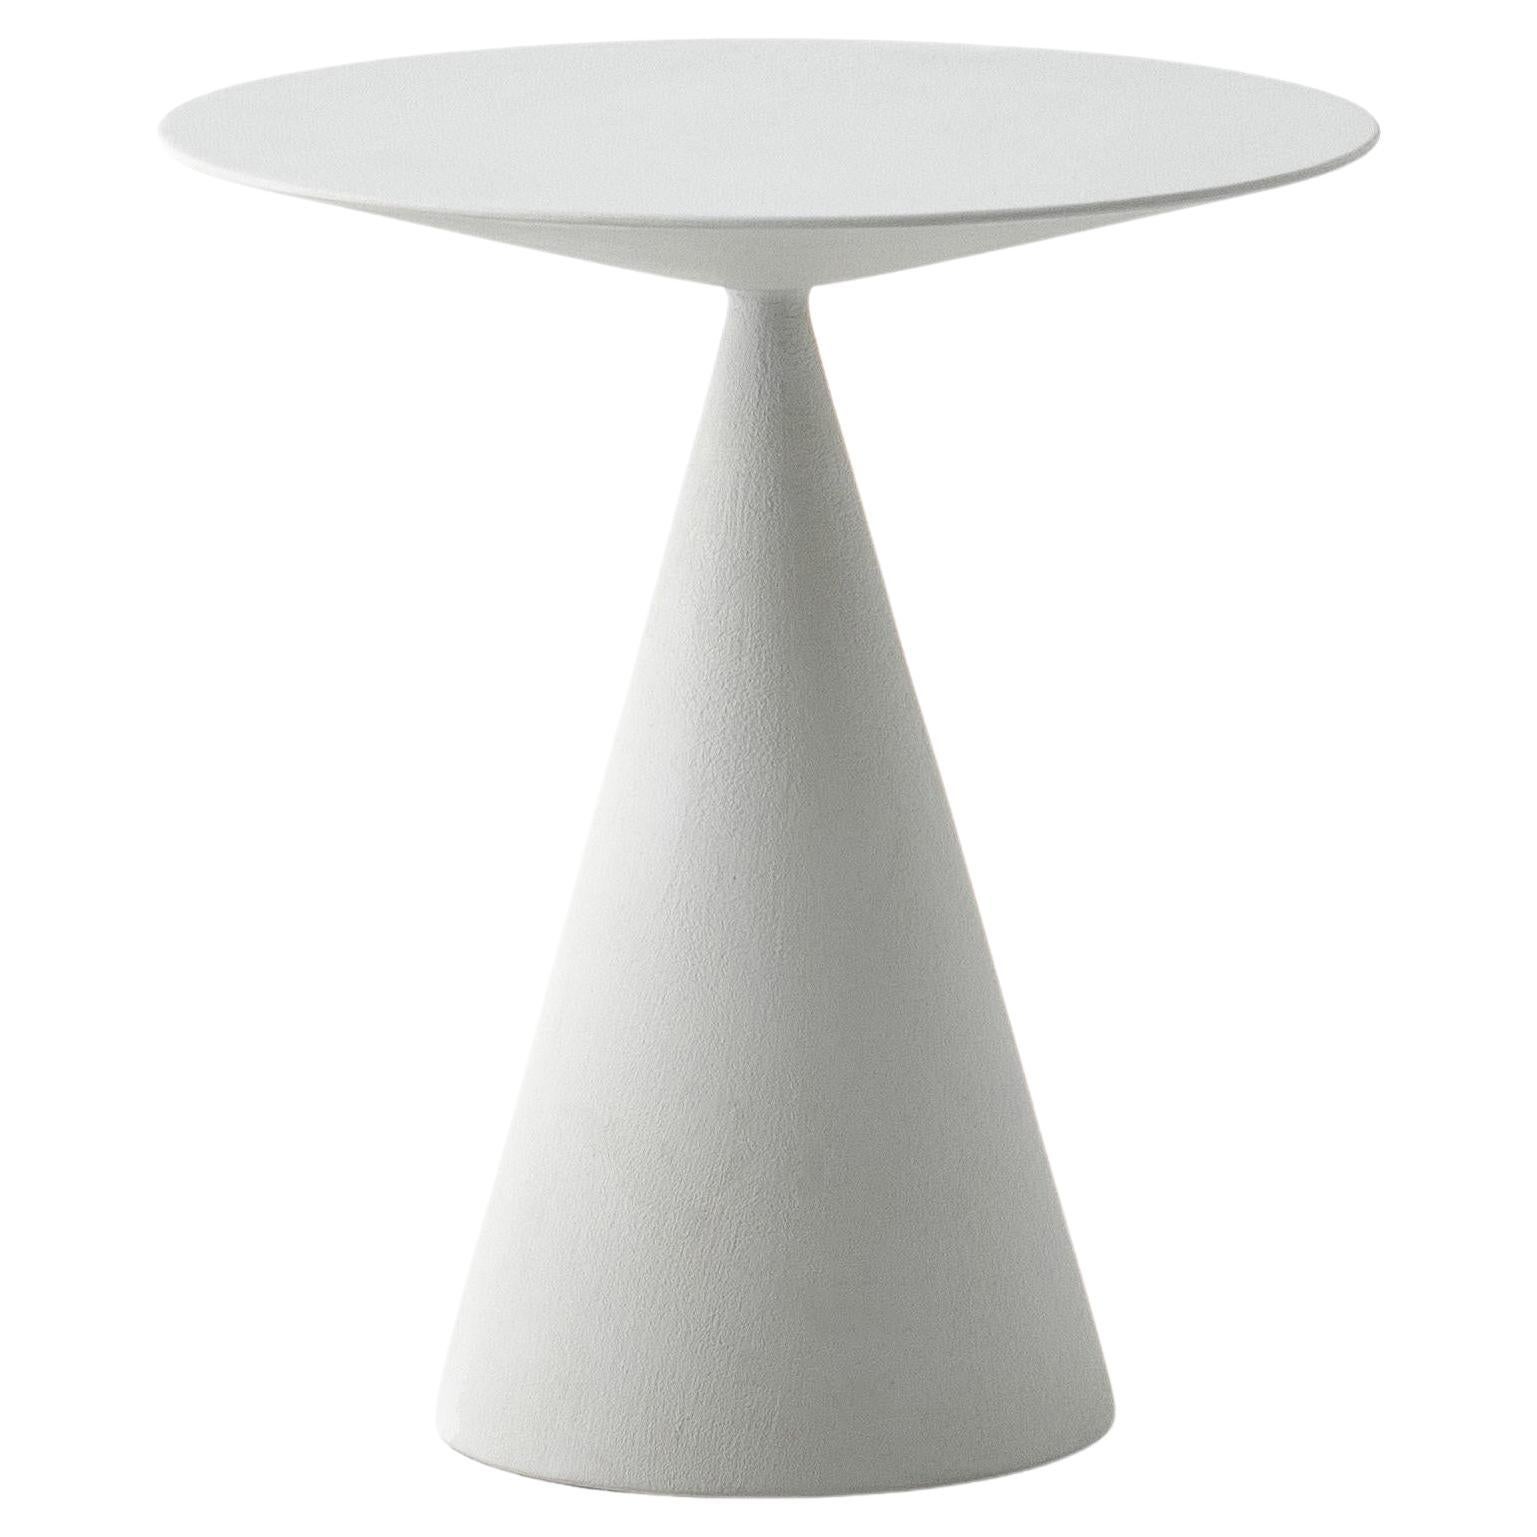 Customizable Desalto Micro Clay Table by Marc Krusin For Sale